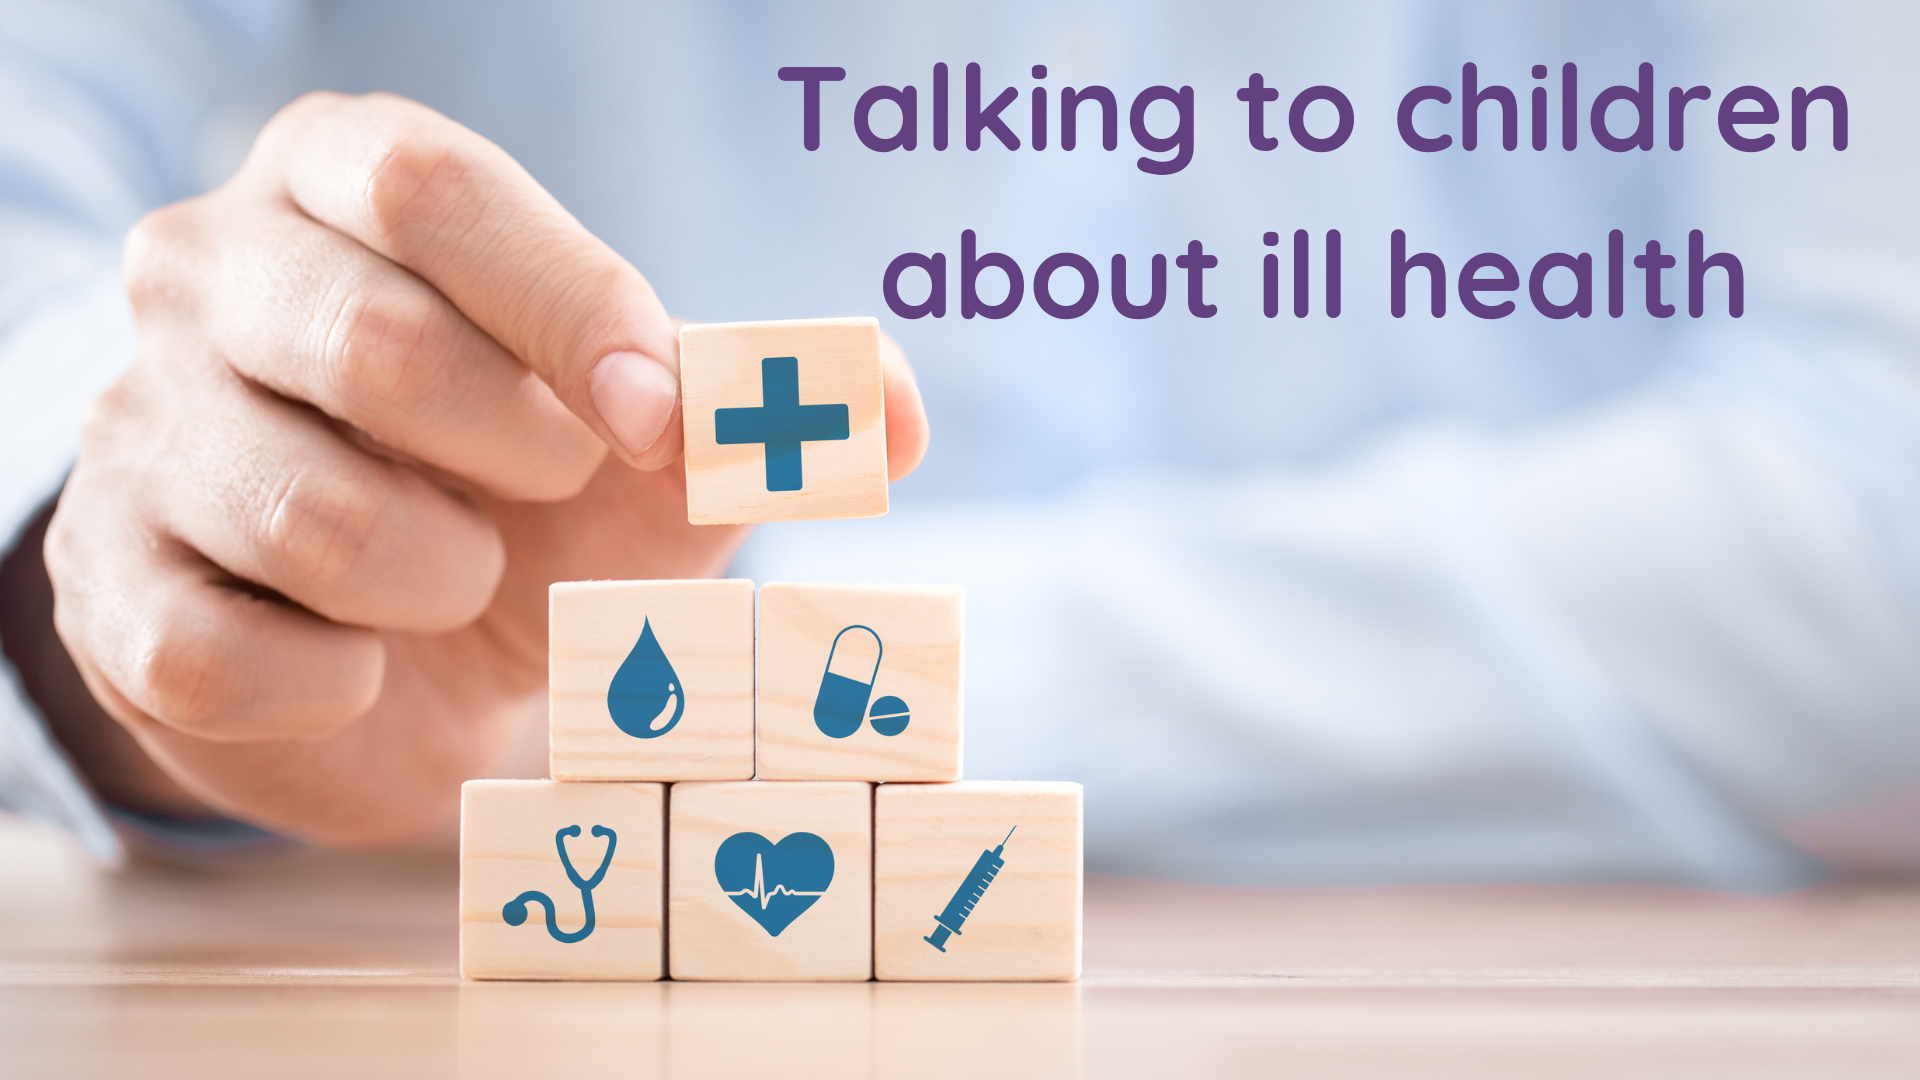 How to talk to children about ill health